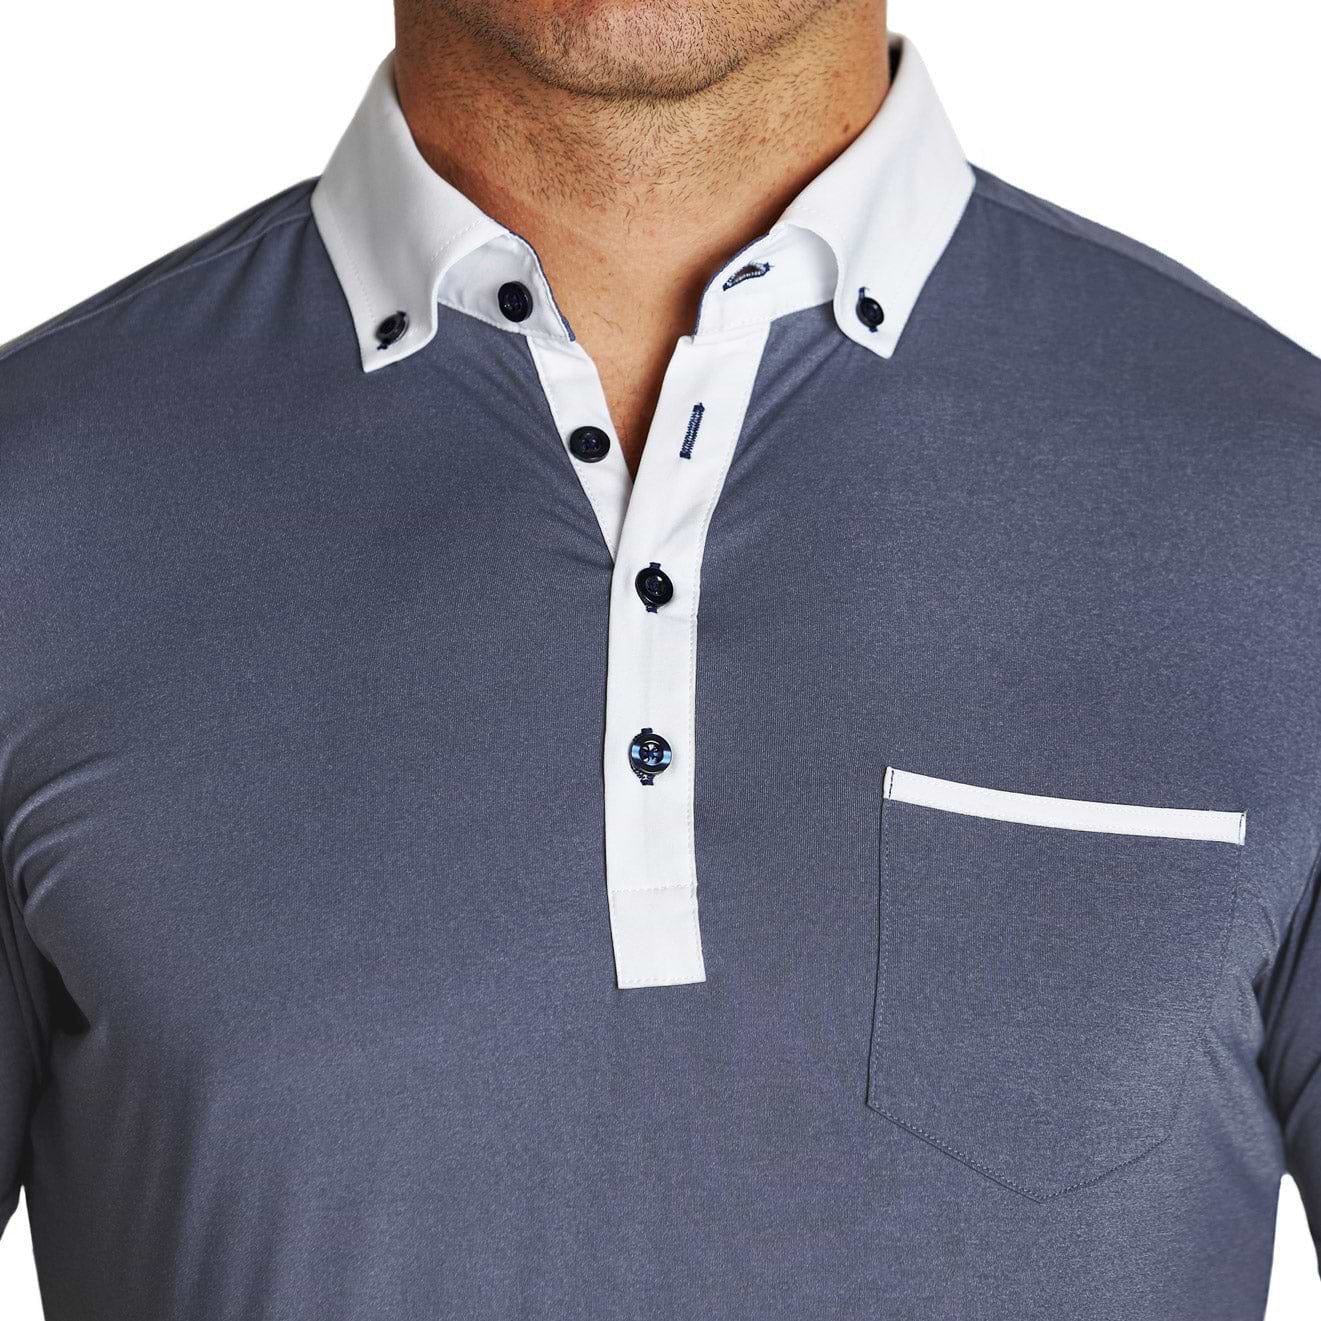 "The Anders" Steel Blue Tech Polo with White Accents